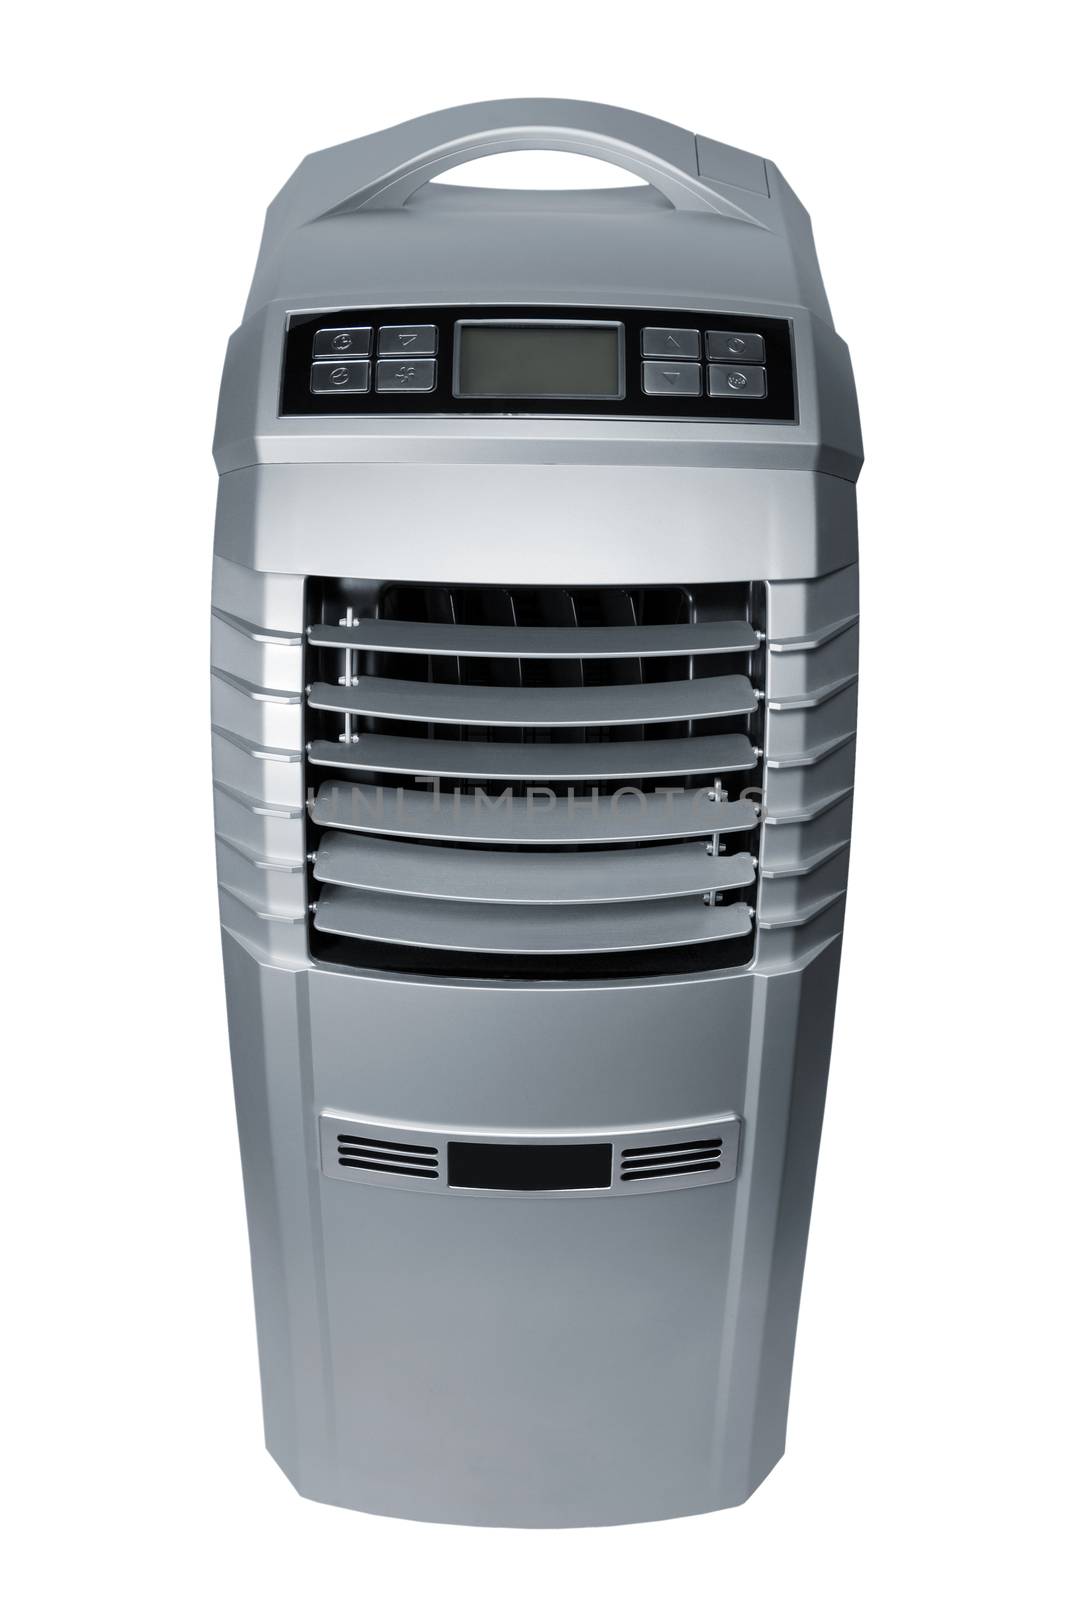 The modern mobile air-conditioner on a white background